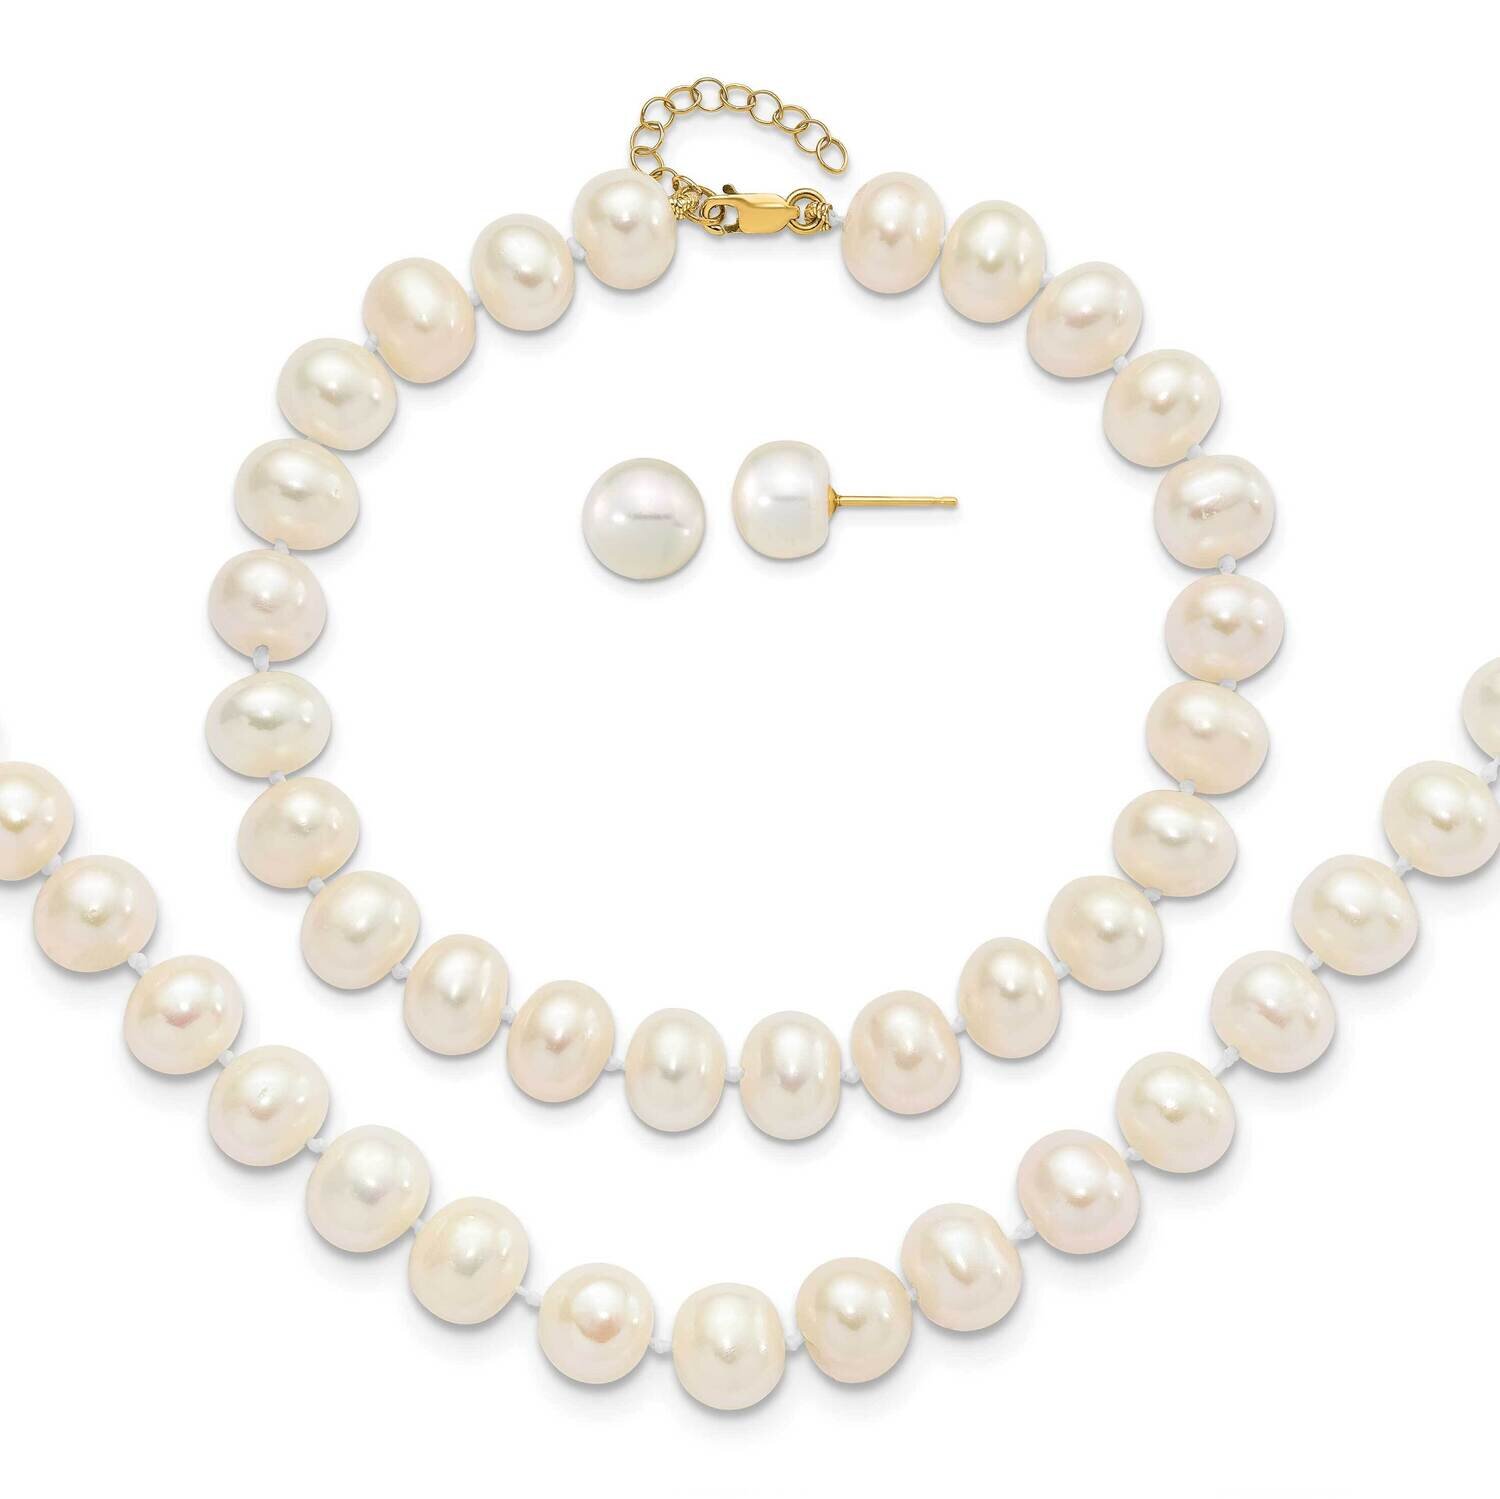 8-9mm Near Rnd Cultured Freshwater Pearl Earring with 1 Inch Extender Bracelet with 2 Inch Necklace Set 14k Gold XF769SET